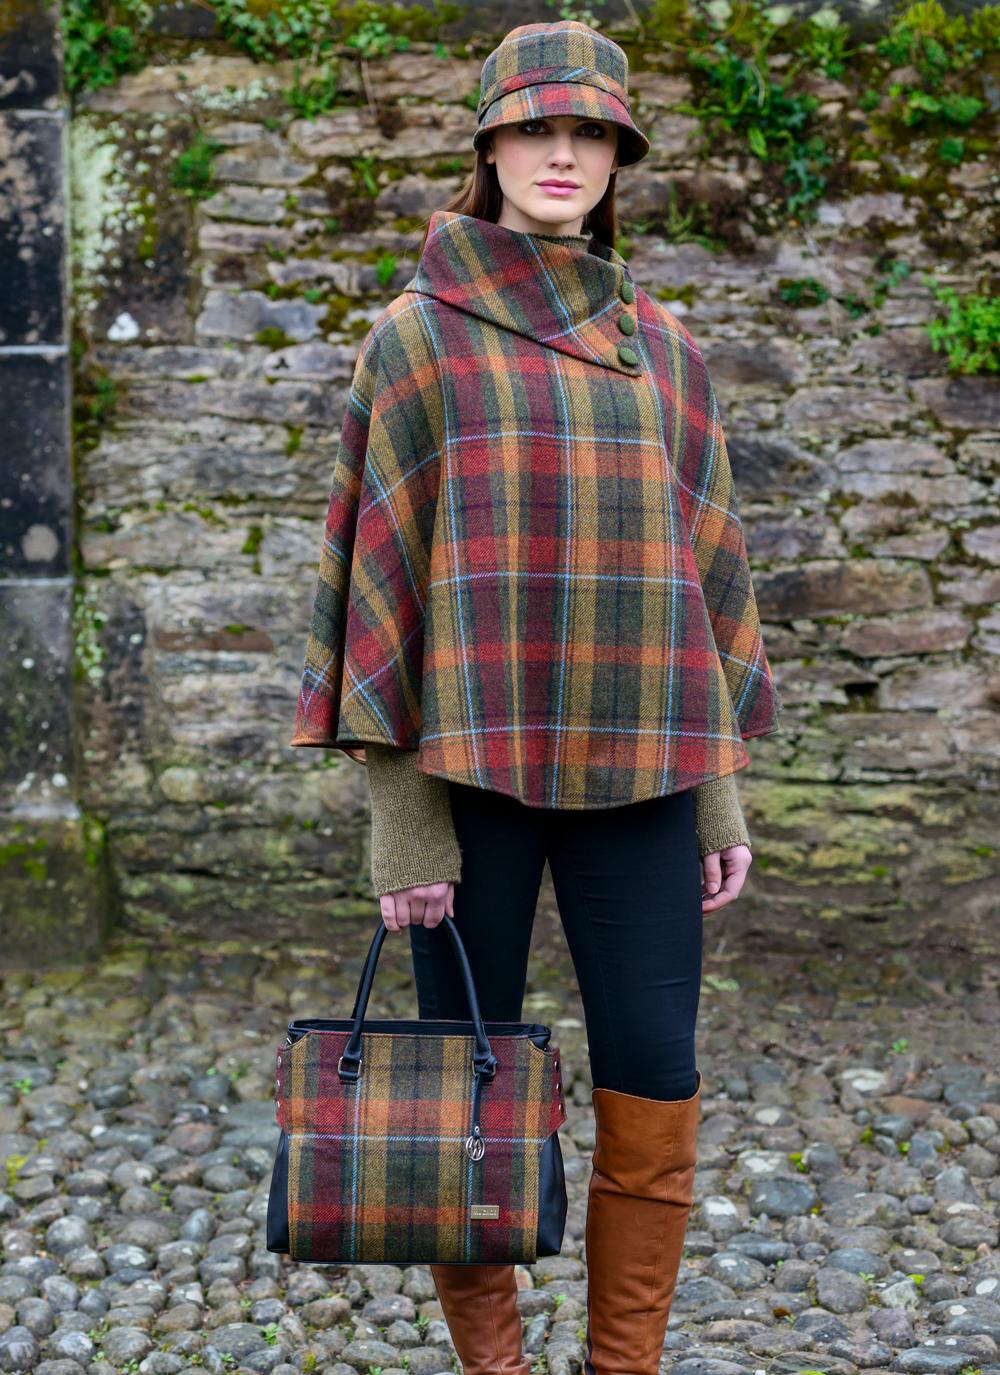 100% Irish Wool One Size Fits All Made in Ireland Mucros Weavers Ladies Plaid Poncho